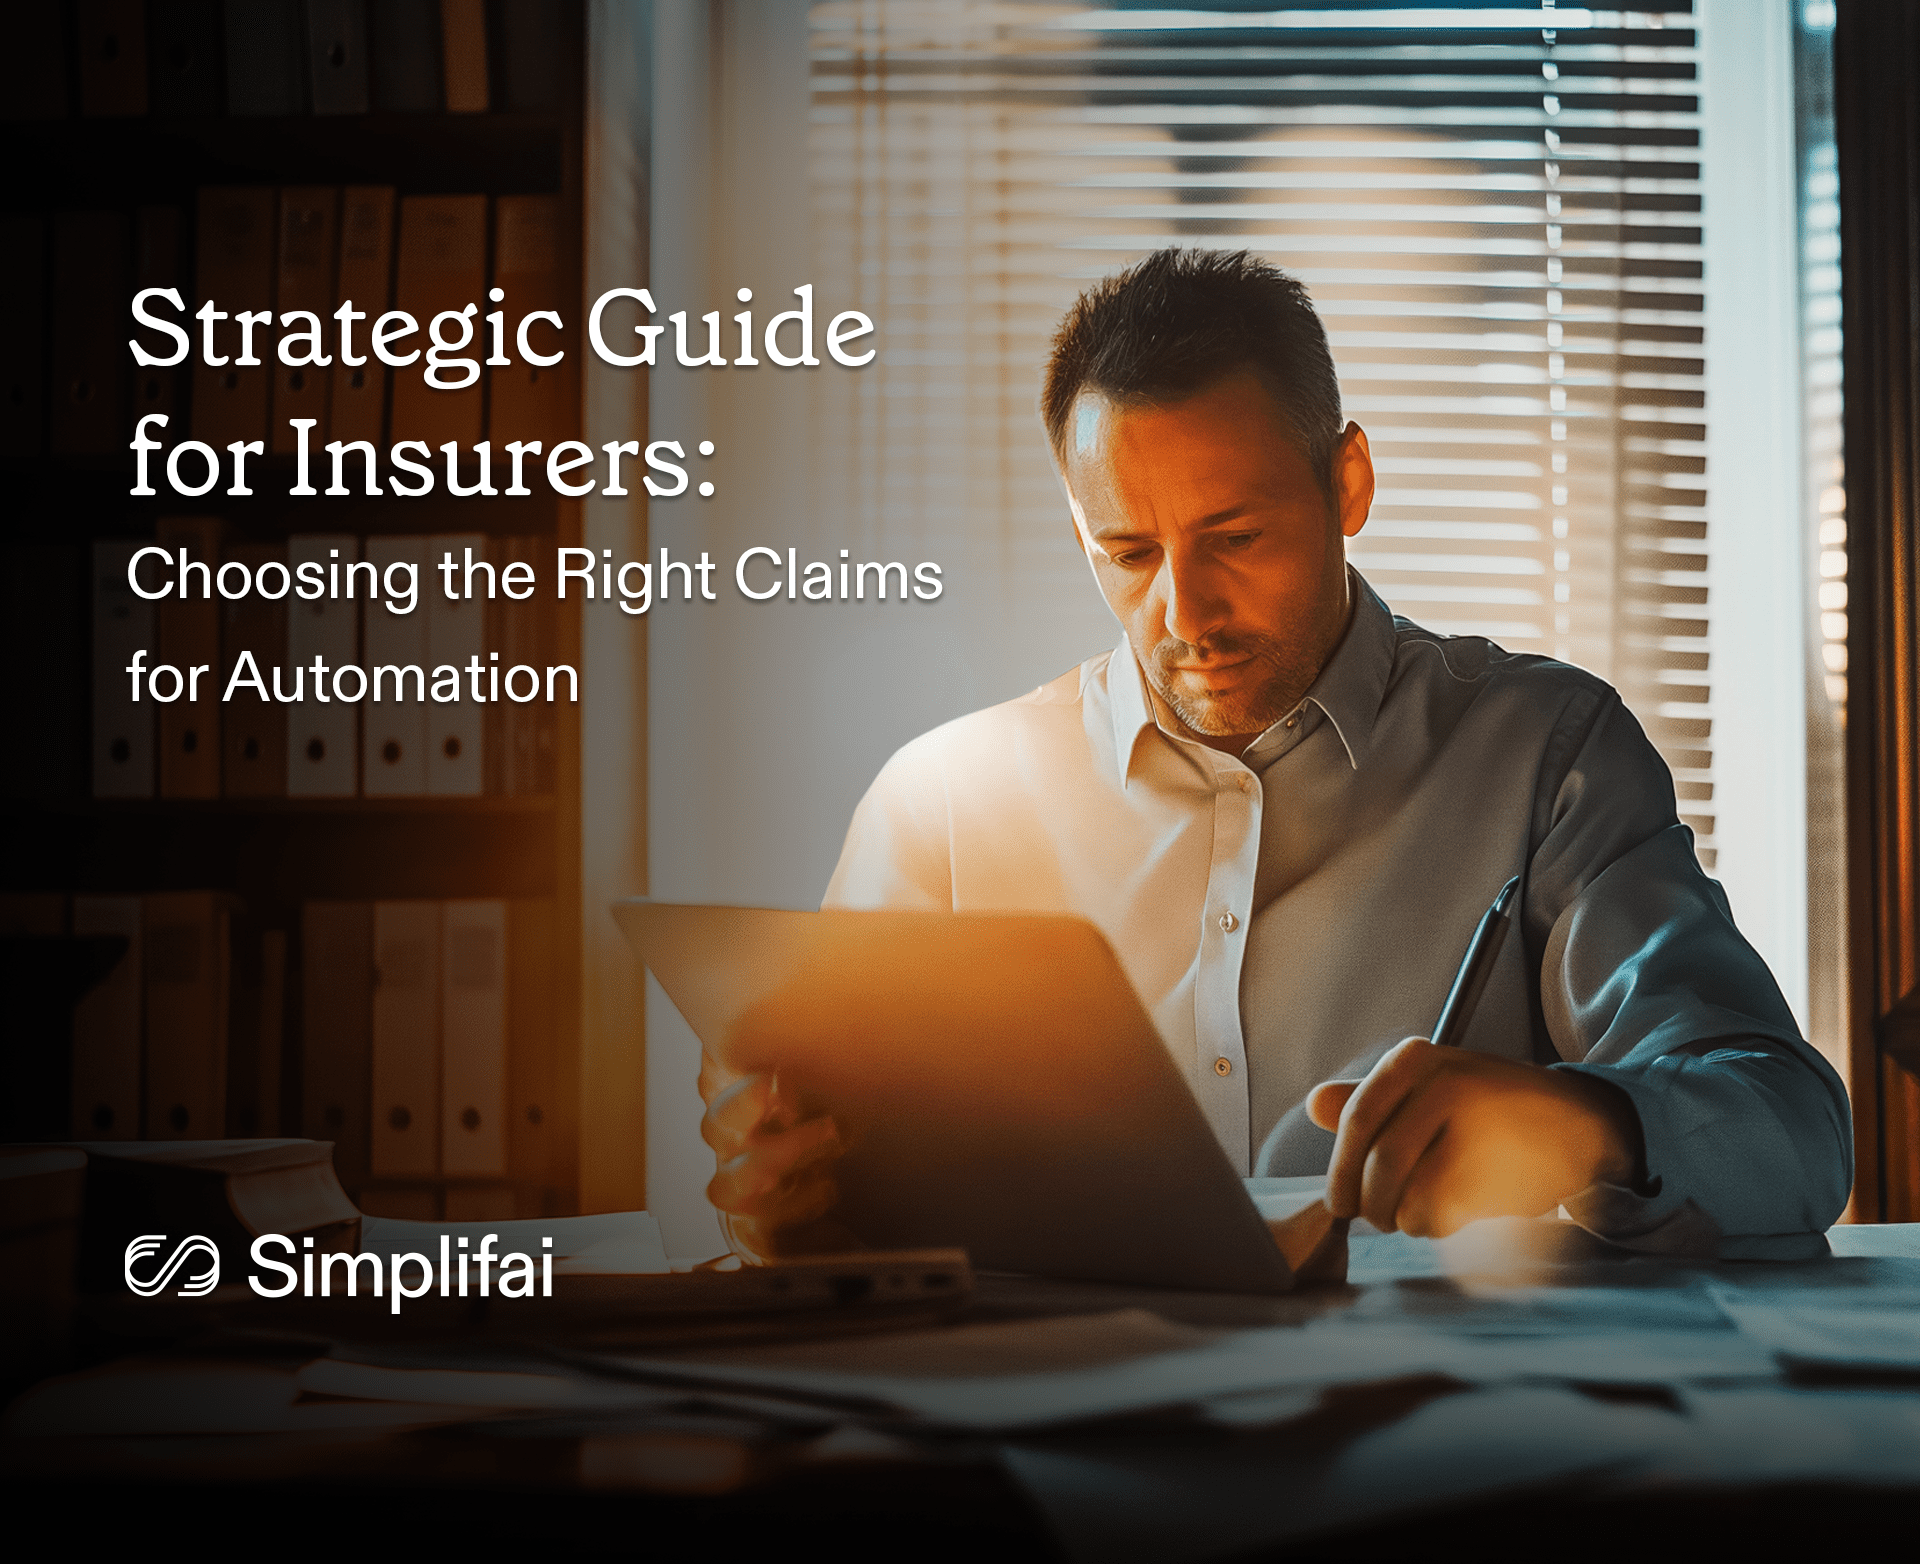 Strategic Guide for Insurers: Choosing the Right Claims for Automation